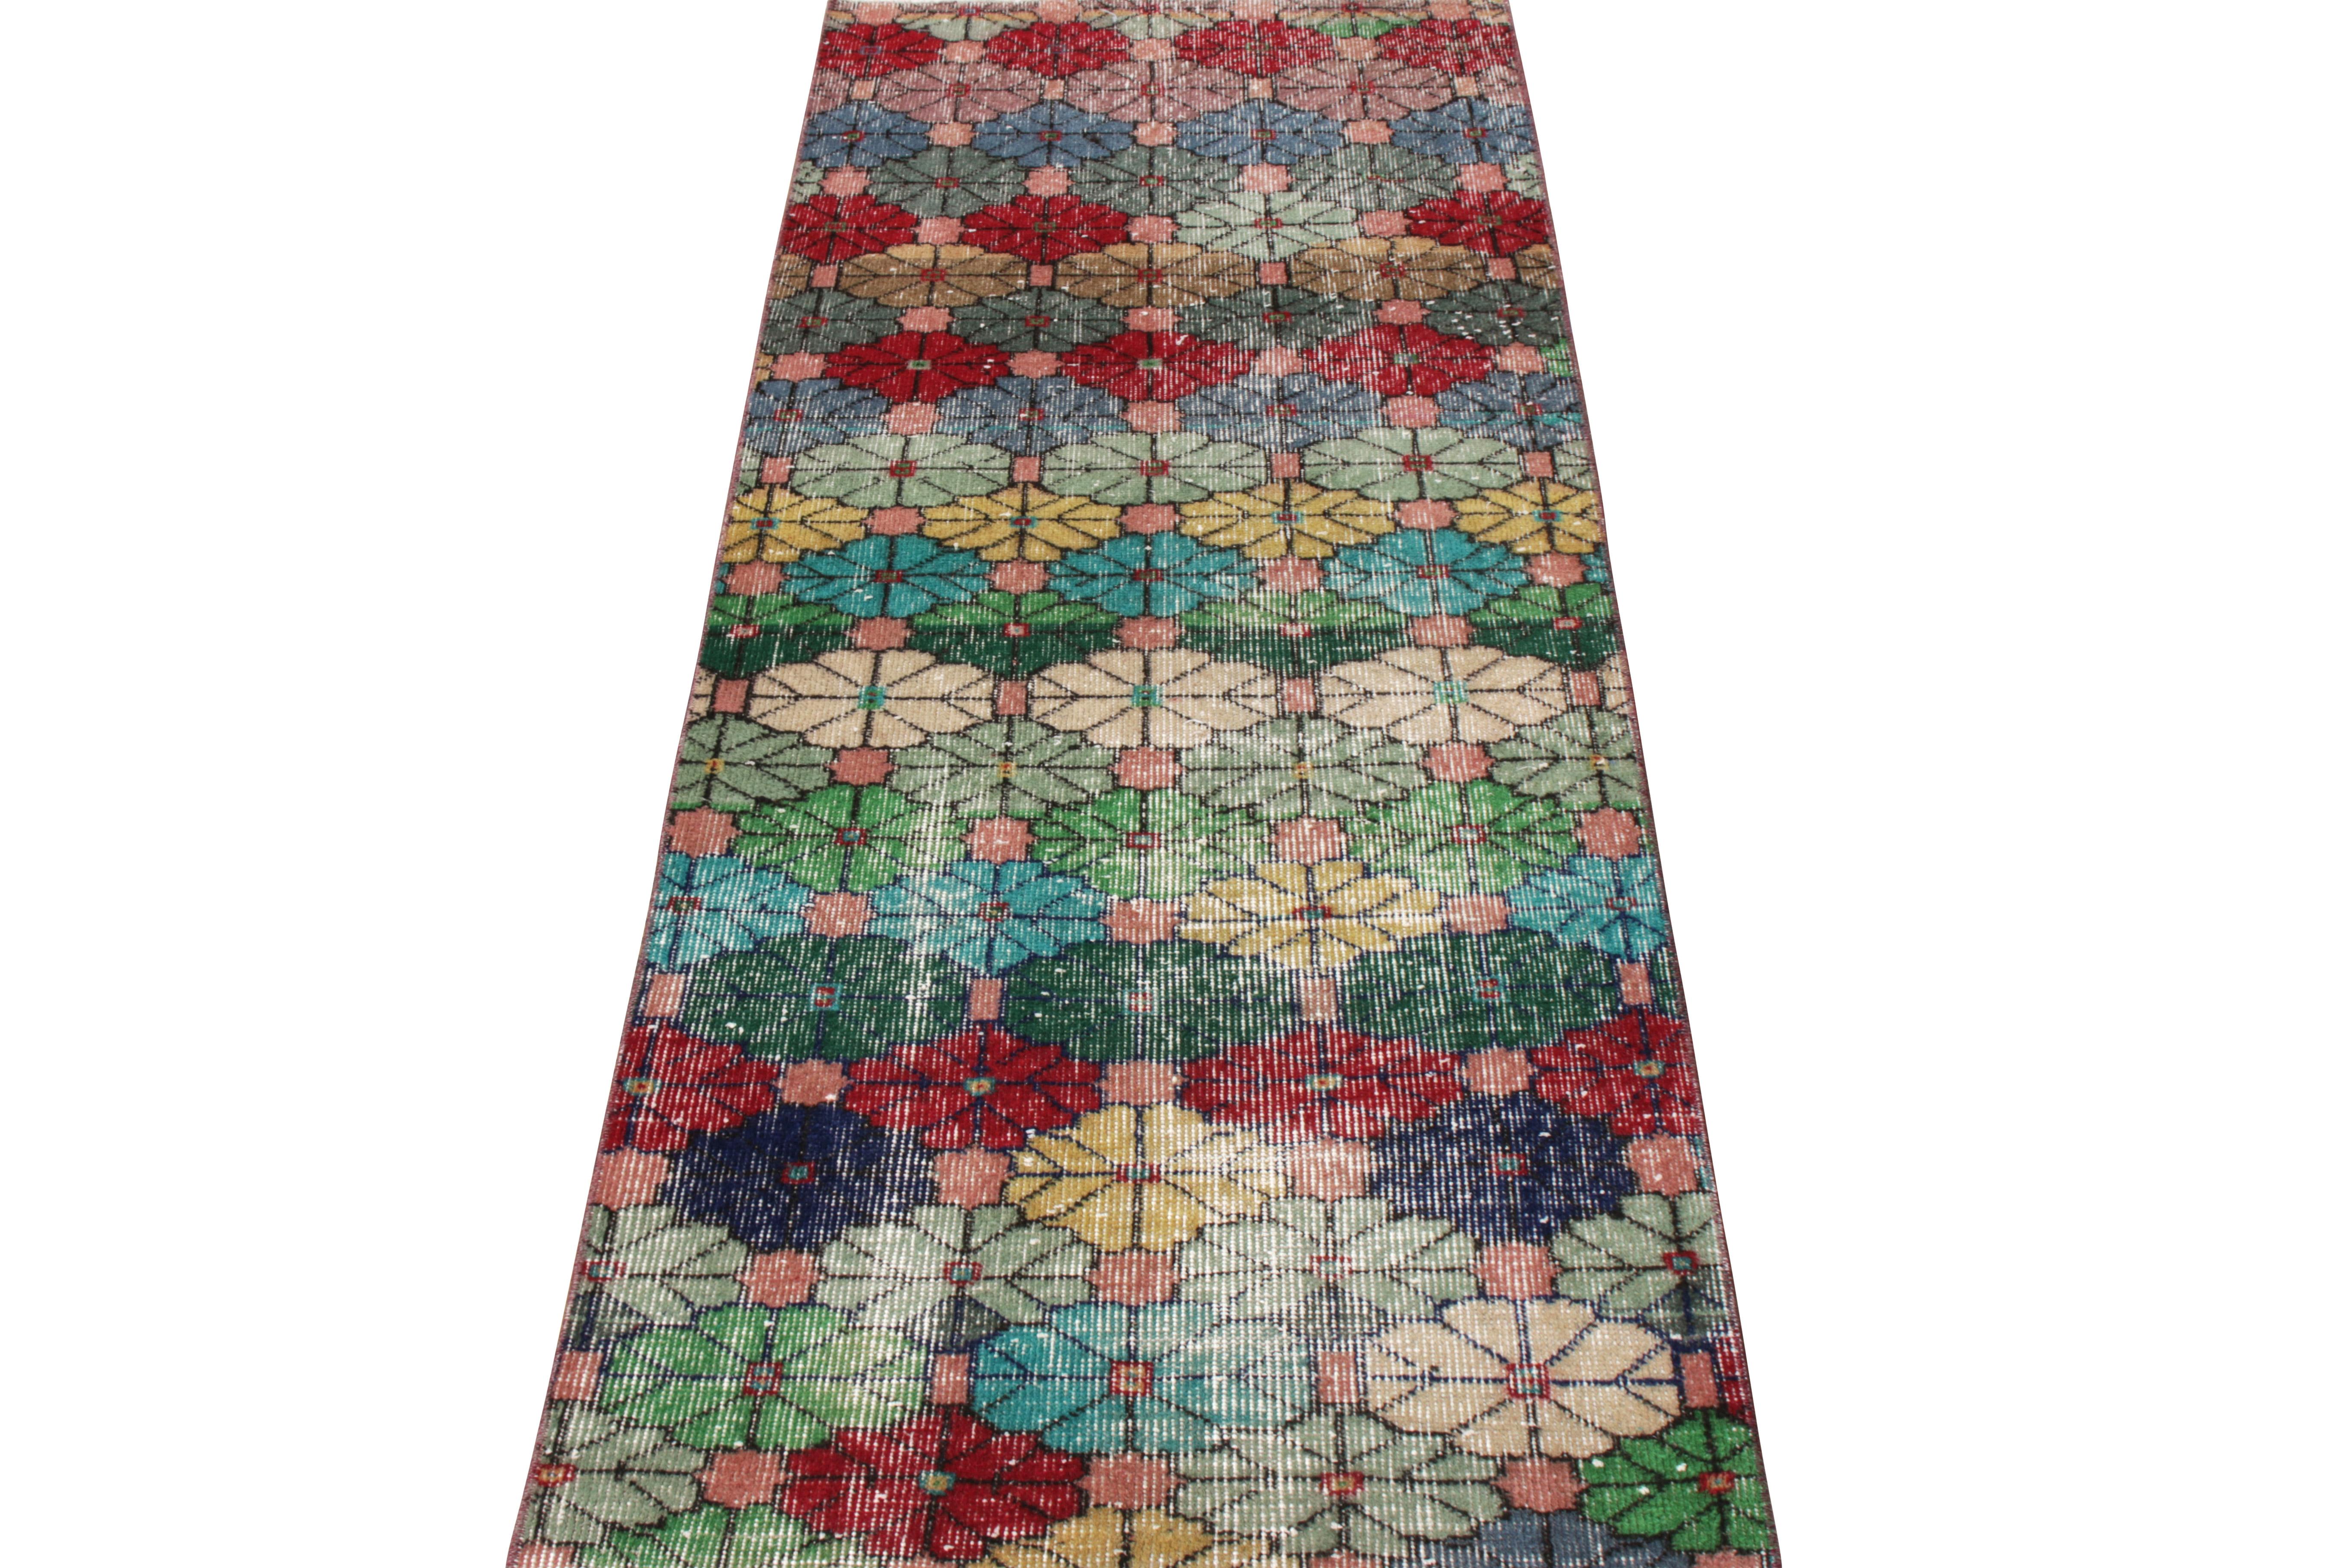 Finely hand-knotted in Turkey originating between 1960-1970, this vintage mid-century runner belongs to Rug & Kilim’s midcentury Pasha collection that celebrates the Turkish icon and multidisciplinary designer Zeki Müren with Josh’s hand picked